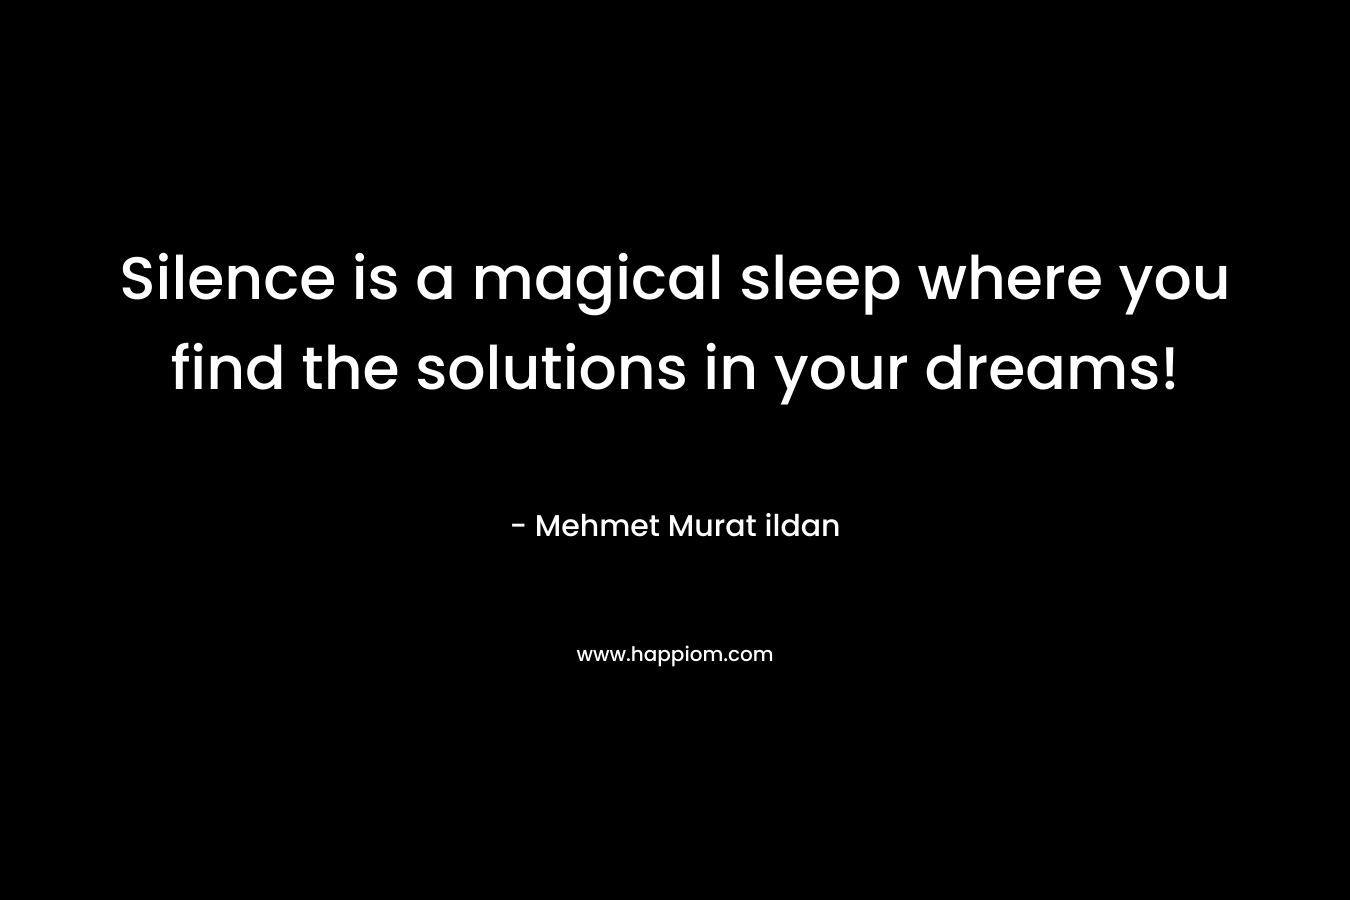 Silence is a magical sleep where you find the solutions in your dreams! – Mehmet Murat ildan